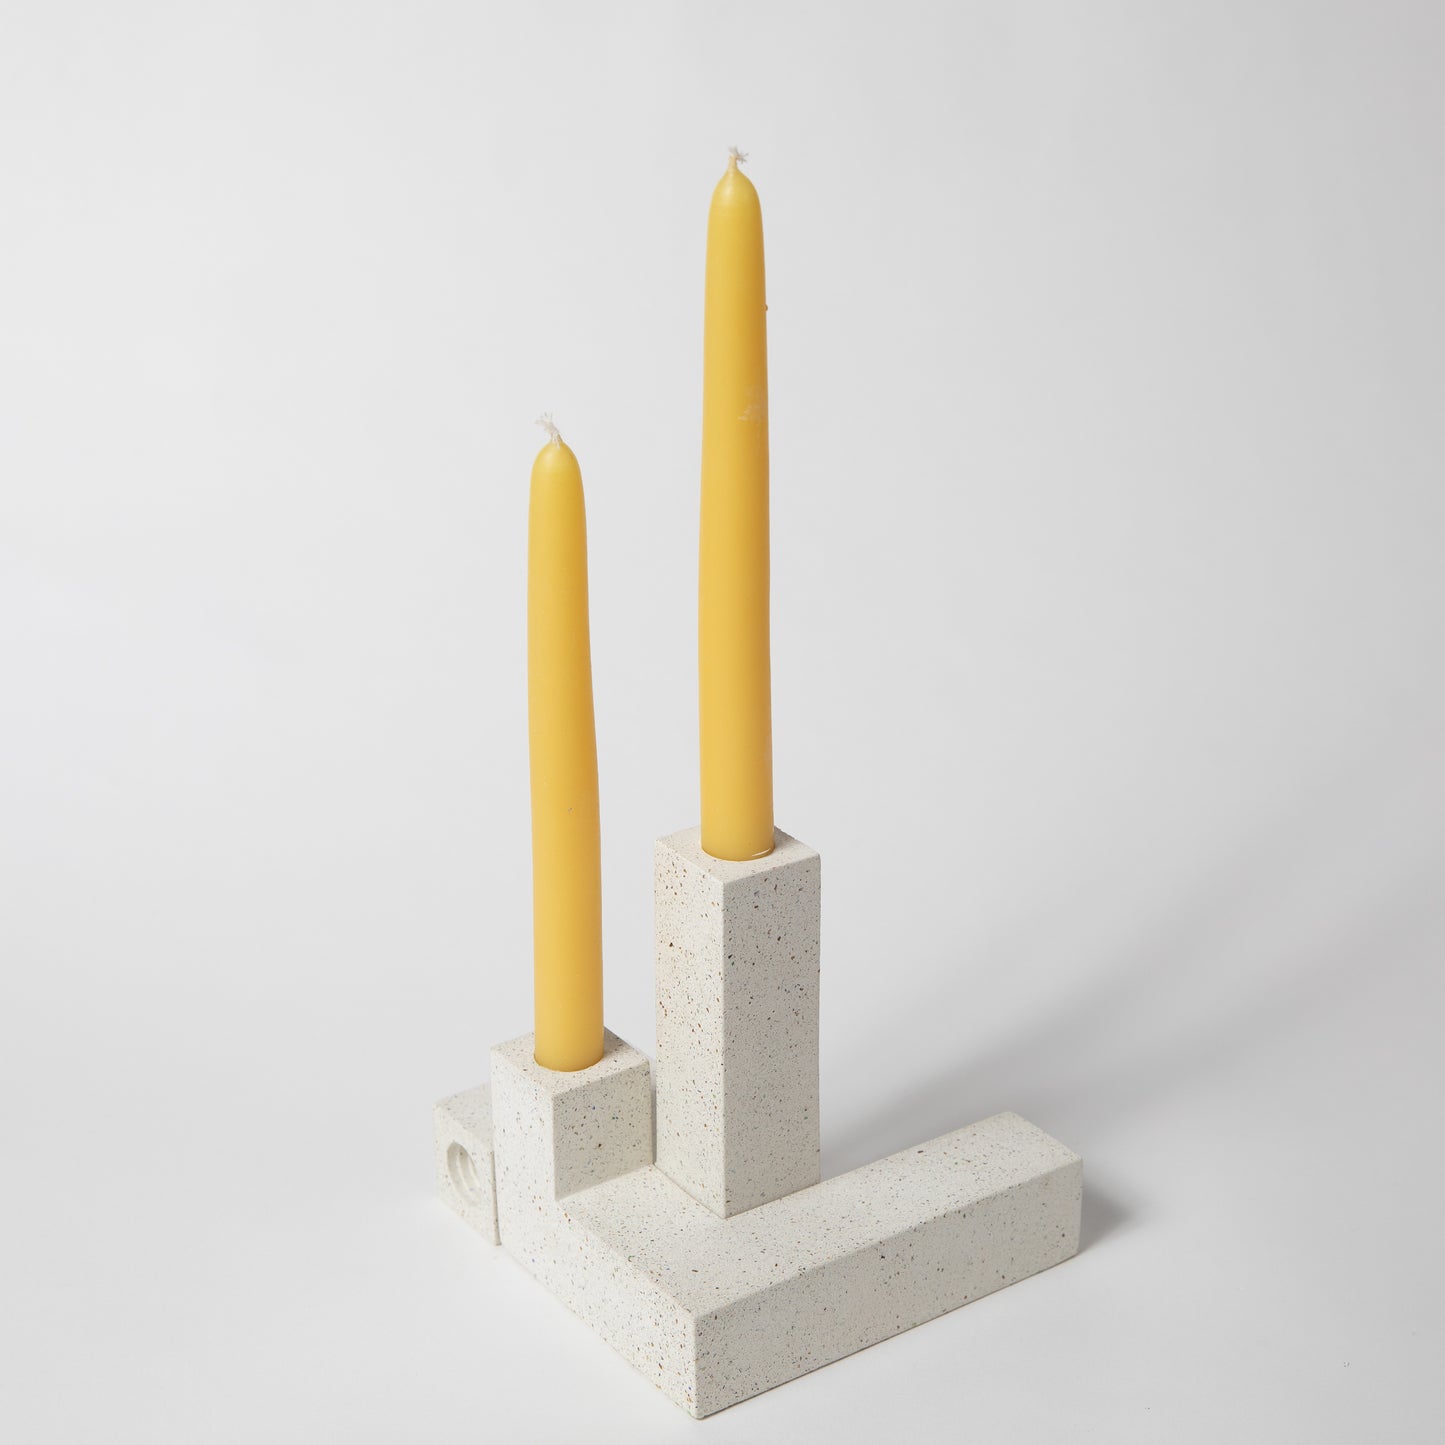 Concrete candlestick holder, set of 2 in white terrazzo holding candlesticks. Shows how they can fit together in fun way.